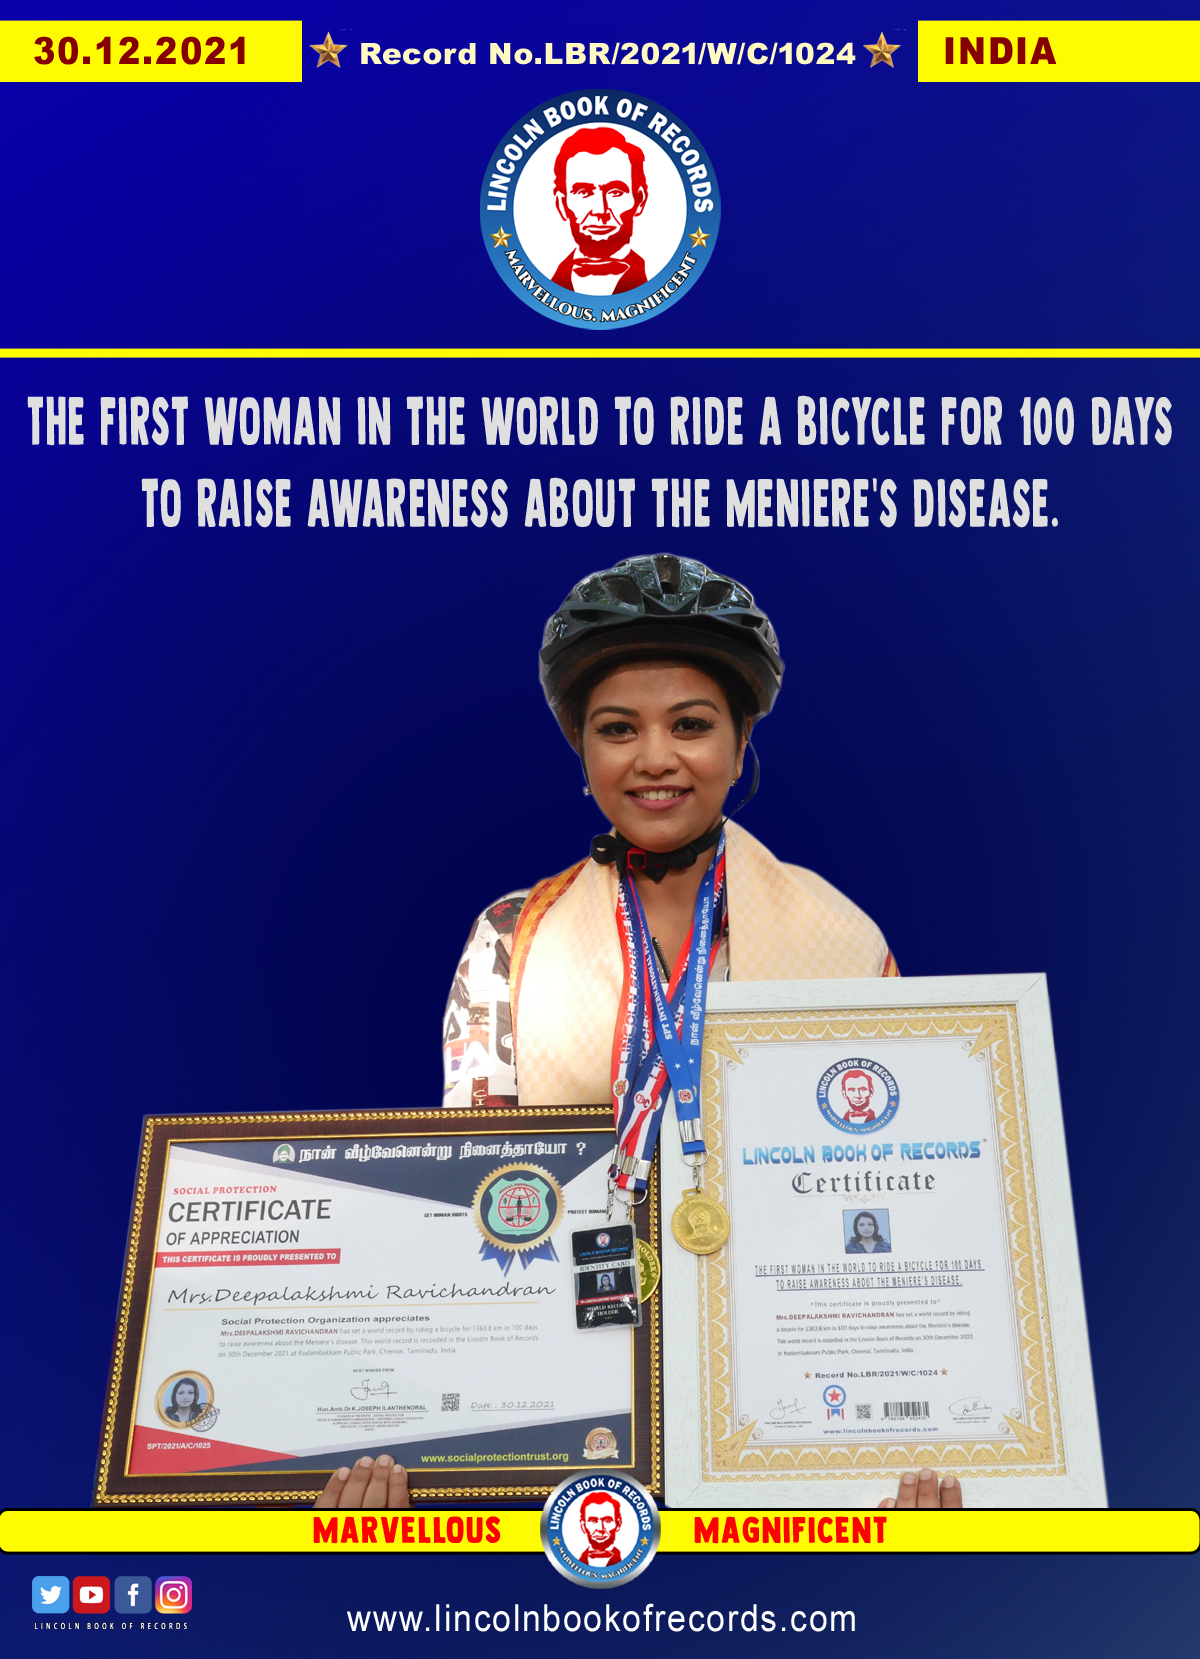 The first woman in the world to ride a bicycle for 100 days to raise awareness about the Meniere’s Disease.